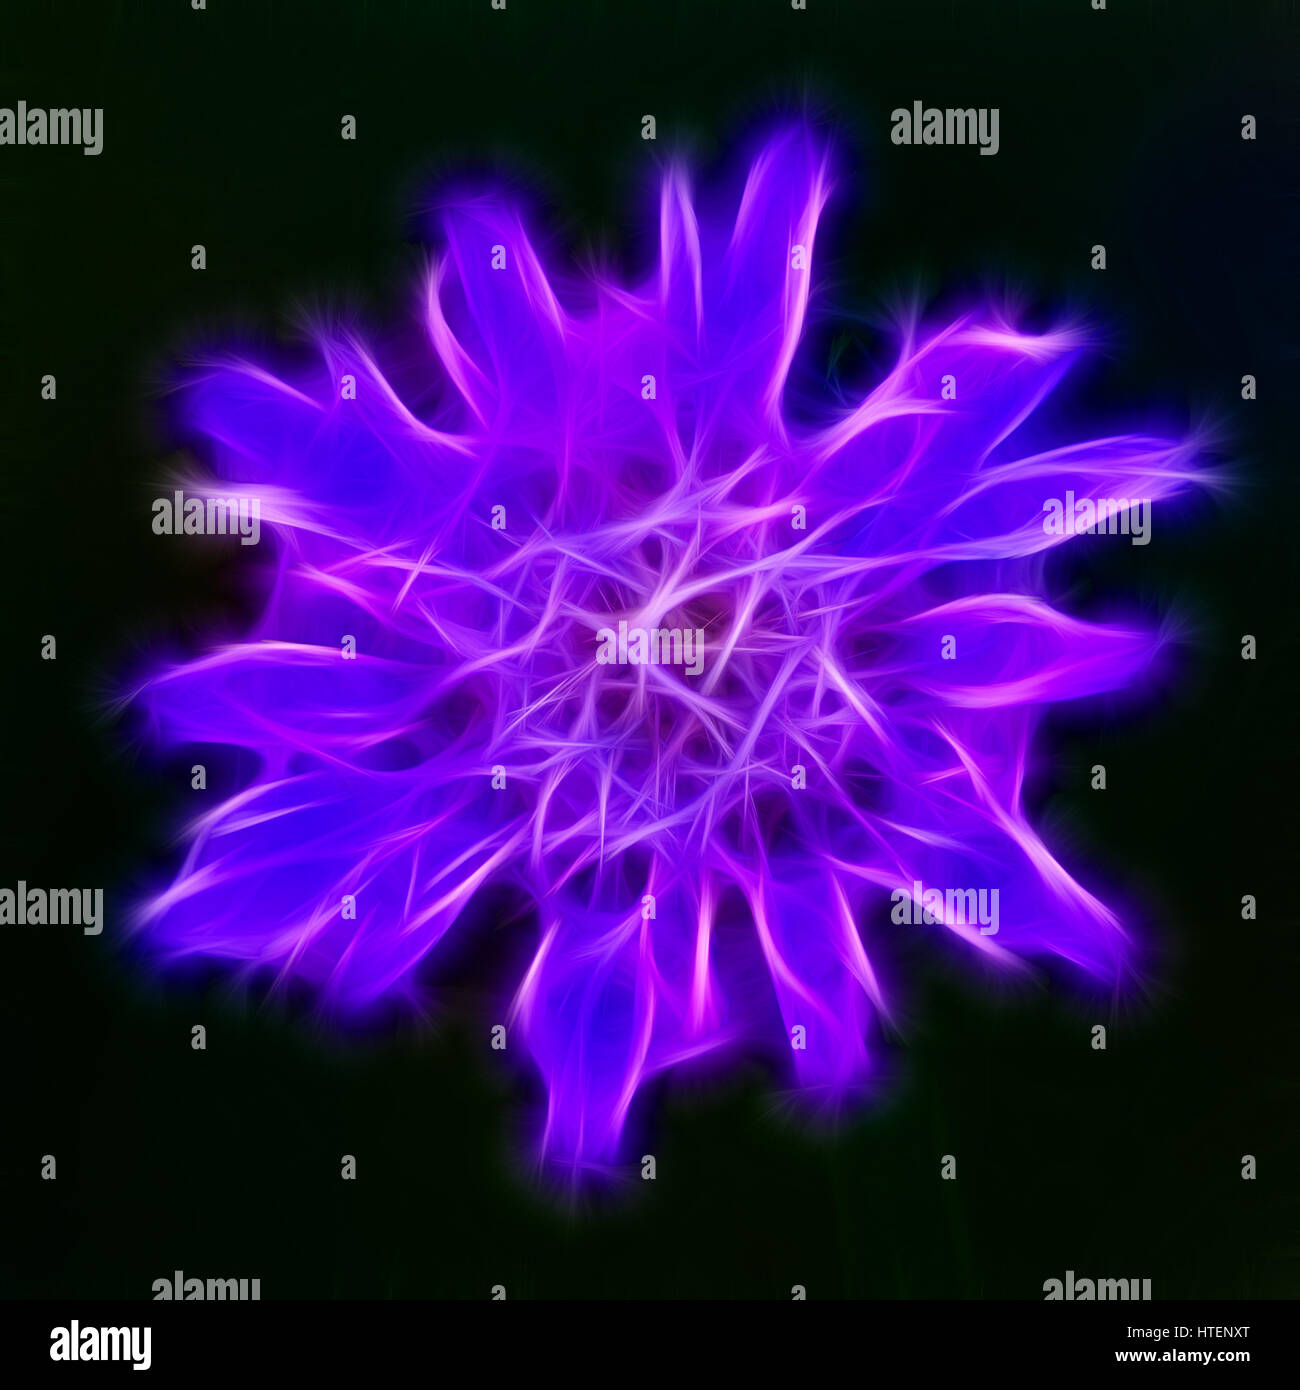 Neon purple flower on a dark background. Abstract flower built with using fractals Stock Photo